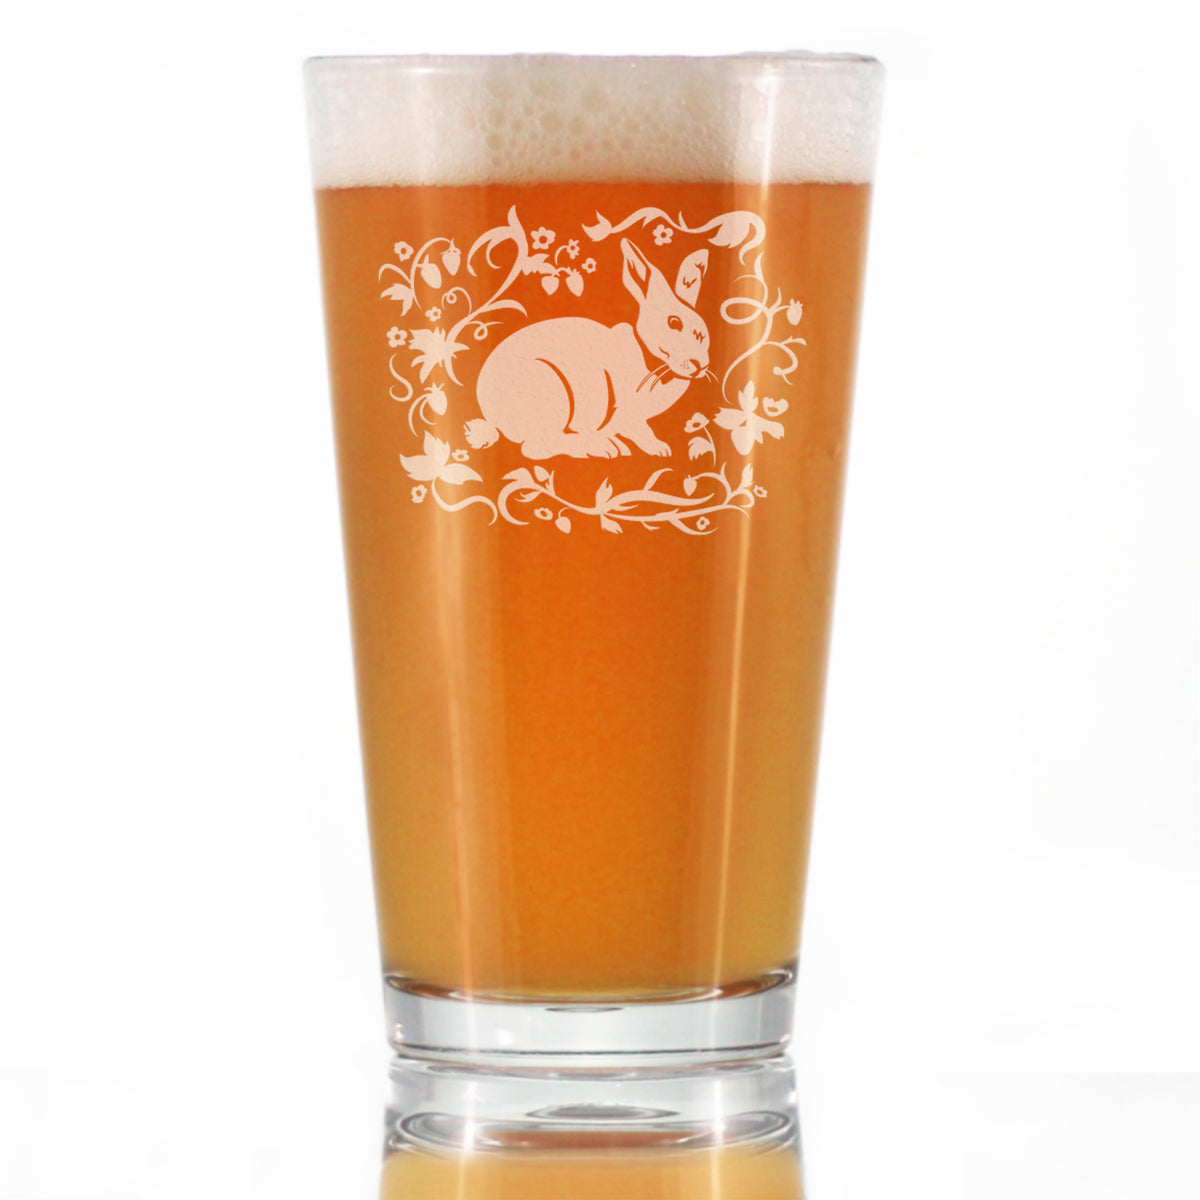 Berry Patch Bunny Rabbit - Pint Glass for Beer - Hand Engraved Gifts for Men &amp; Women That Love Bunnies